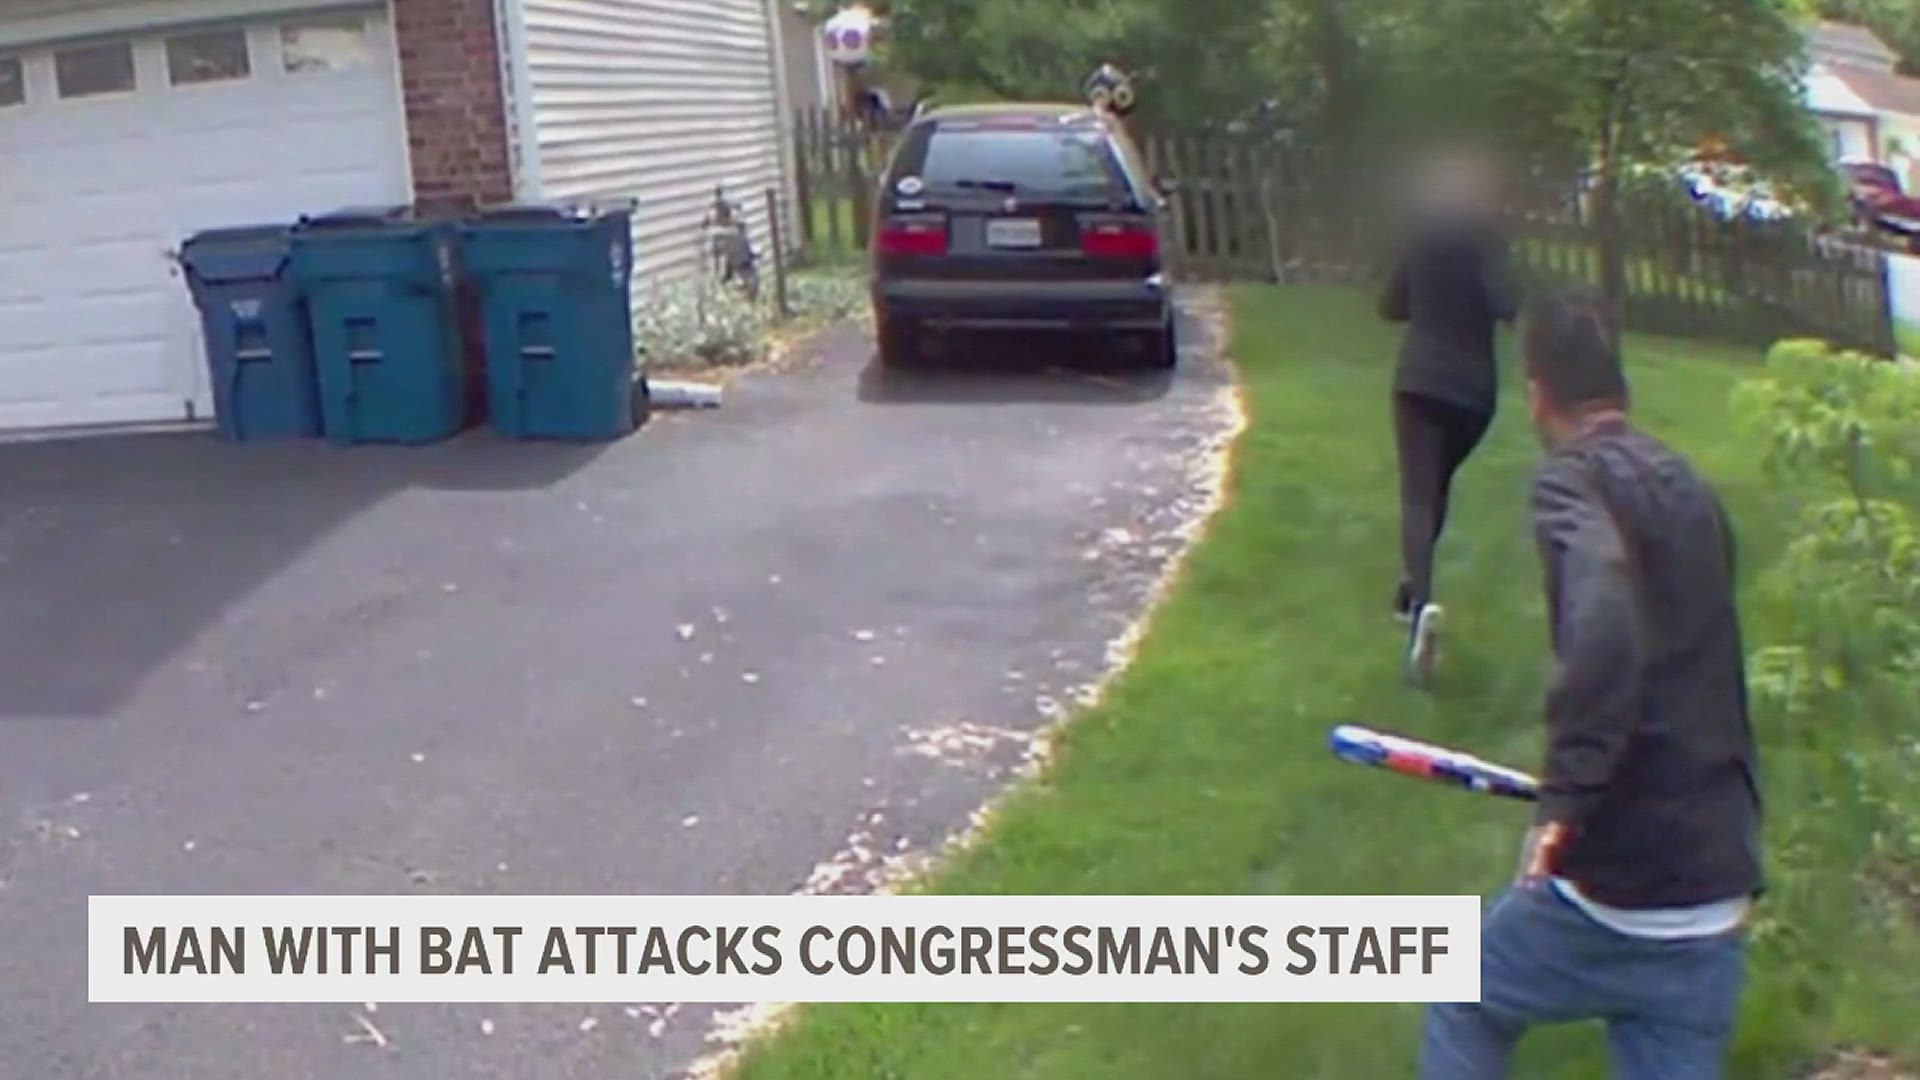 Democratic Congressman Gerry Connolly's office was attacked by a man with a metal baseball bat. Police confirm the man asked for the congressman by name.